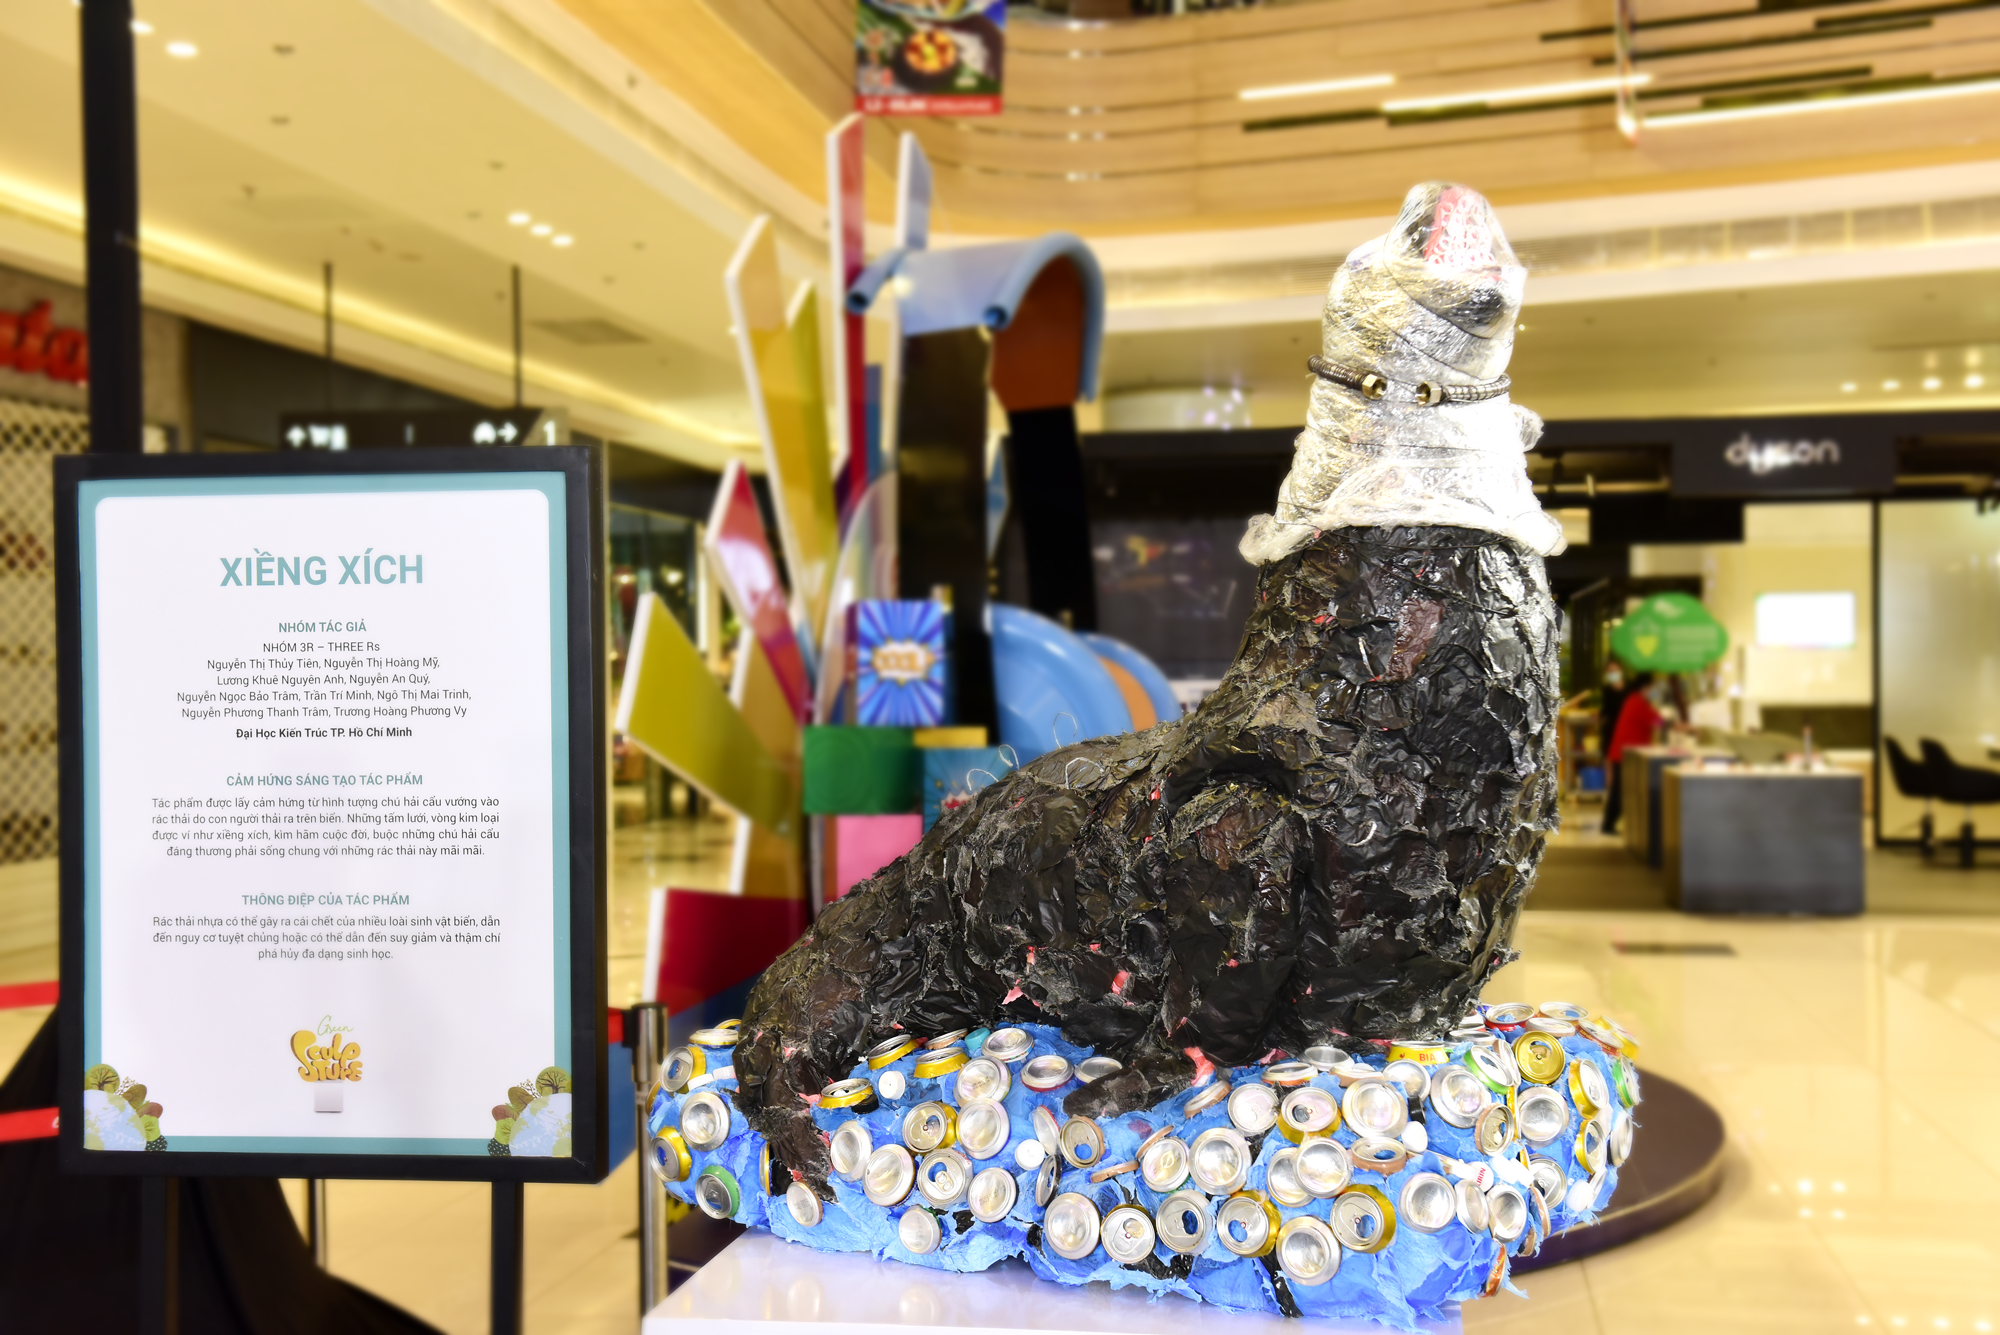 The winning artwork, “Shackles”, was created by a team of students from the University of Architecture Ho Chi Minh City using discarded materials such as plastic bottles and bottle caps.